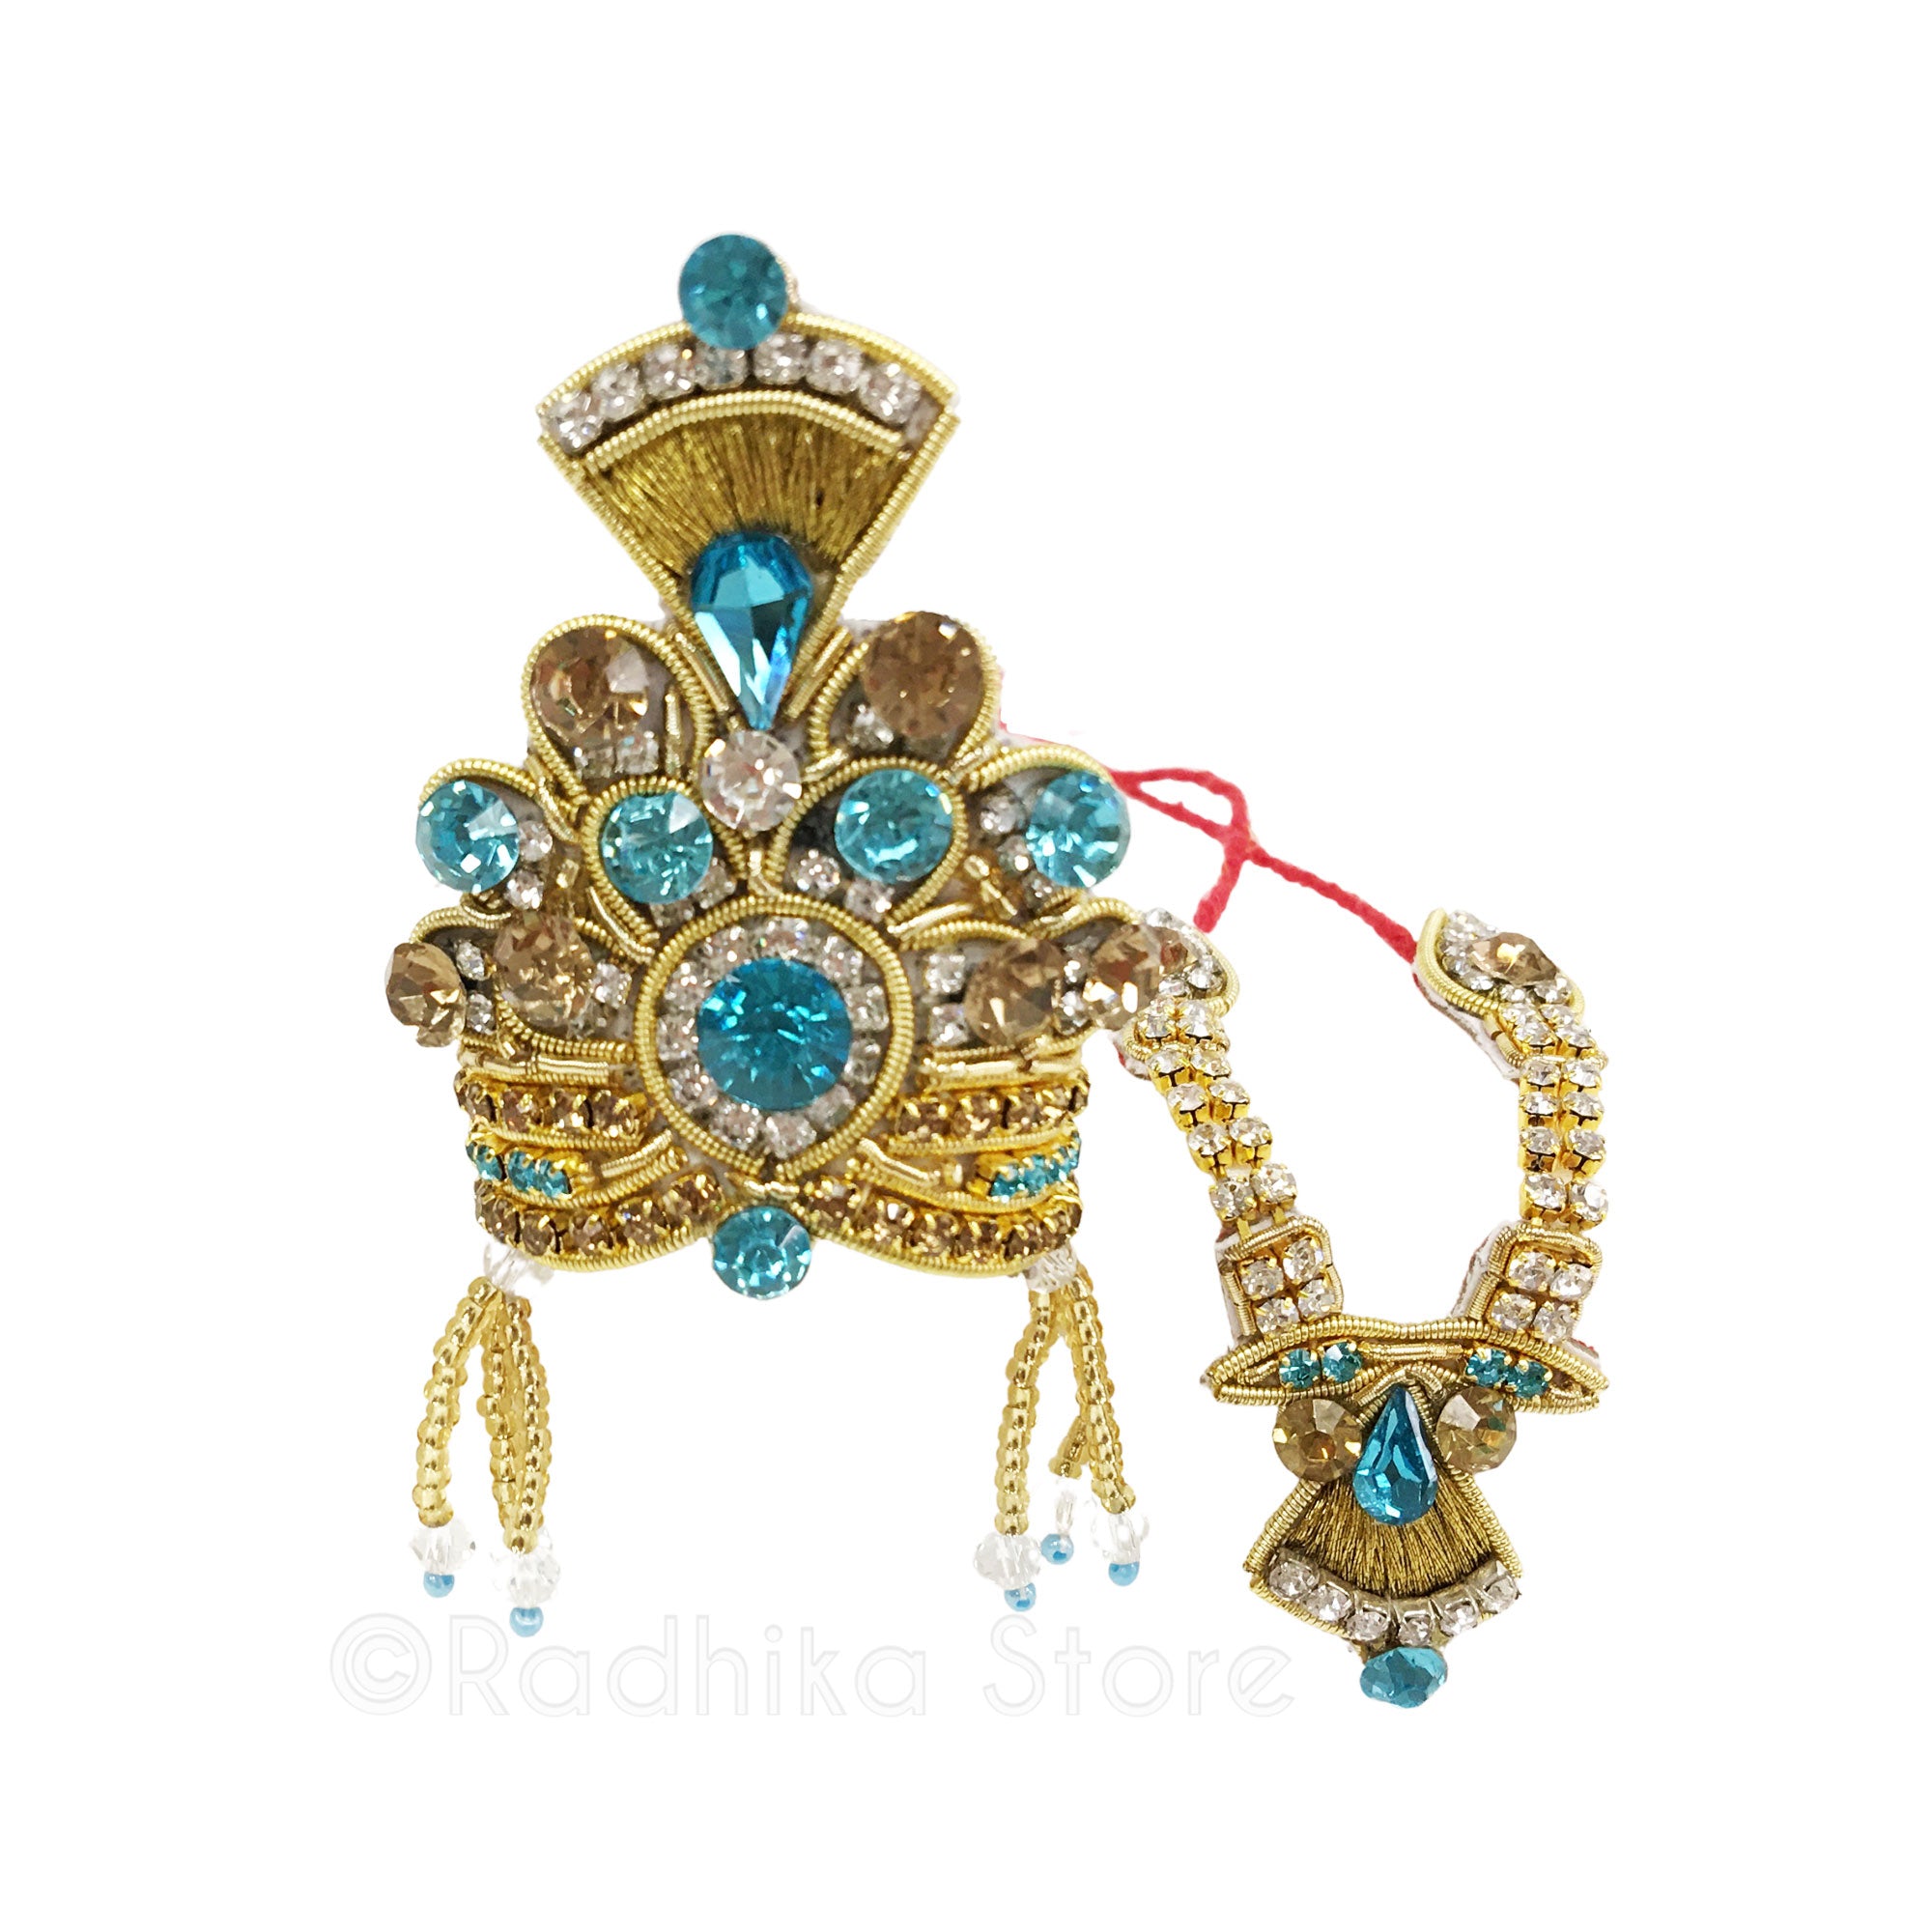 Golden Peacock Feather in Yamuna - Deity Crown and Necklace Set